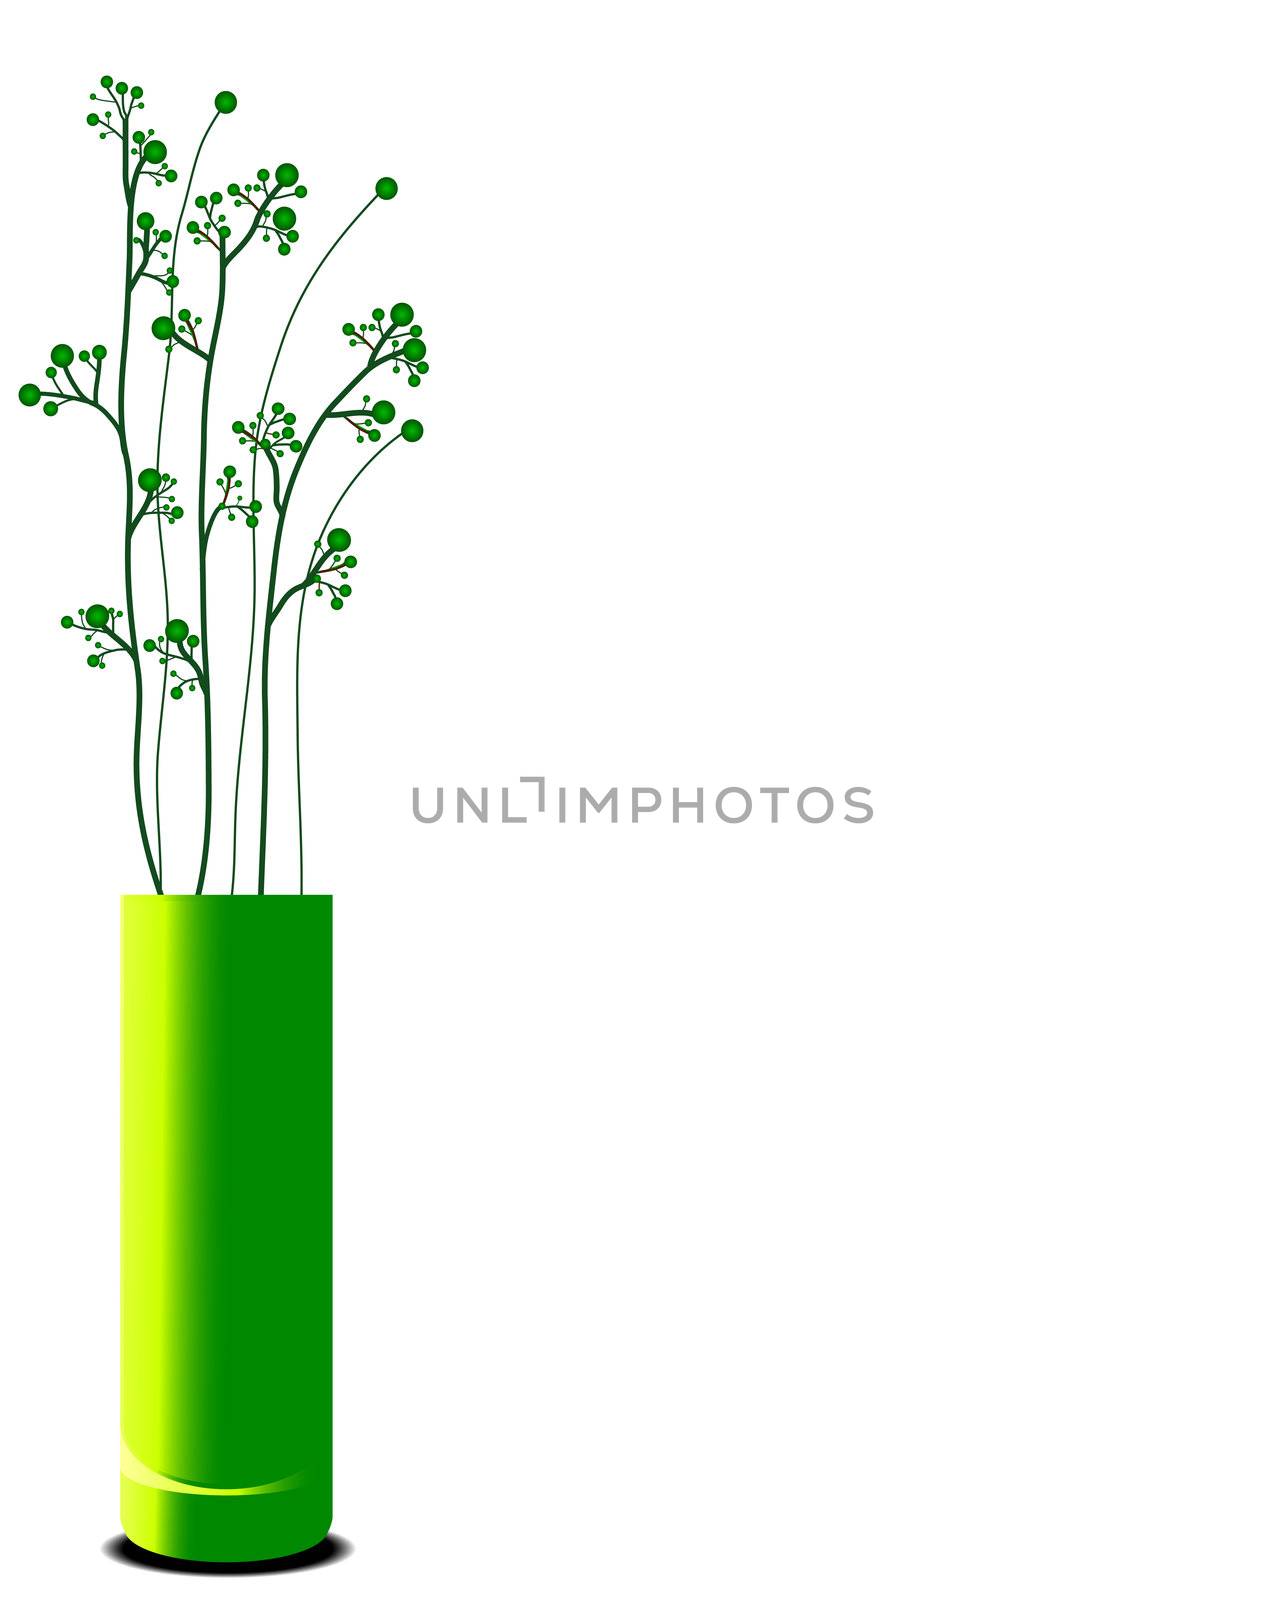 beautiful flowers in a vase by peromarketing